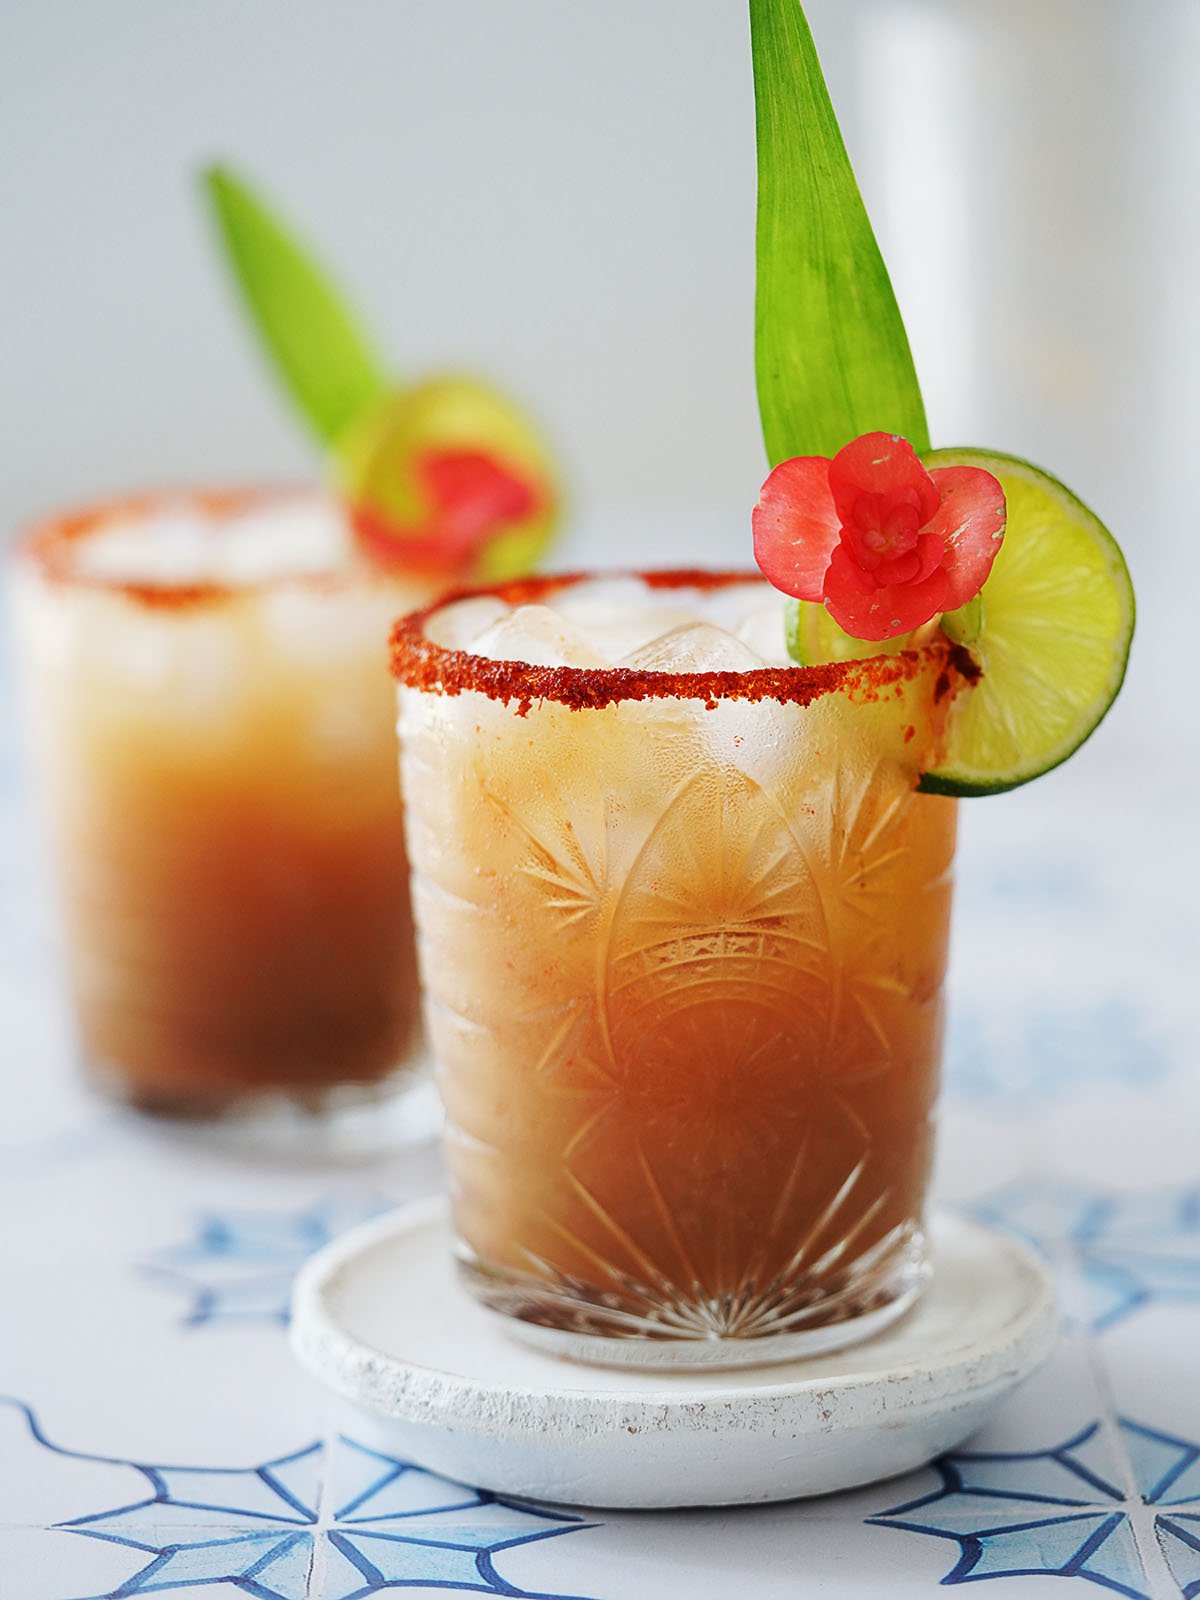 A cocktail glass with margarita de tamarindo garnished with a slice of lime.